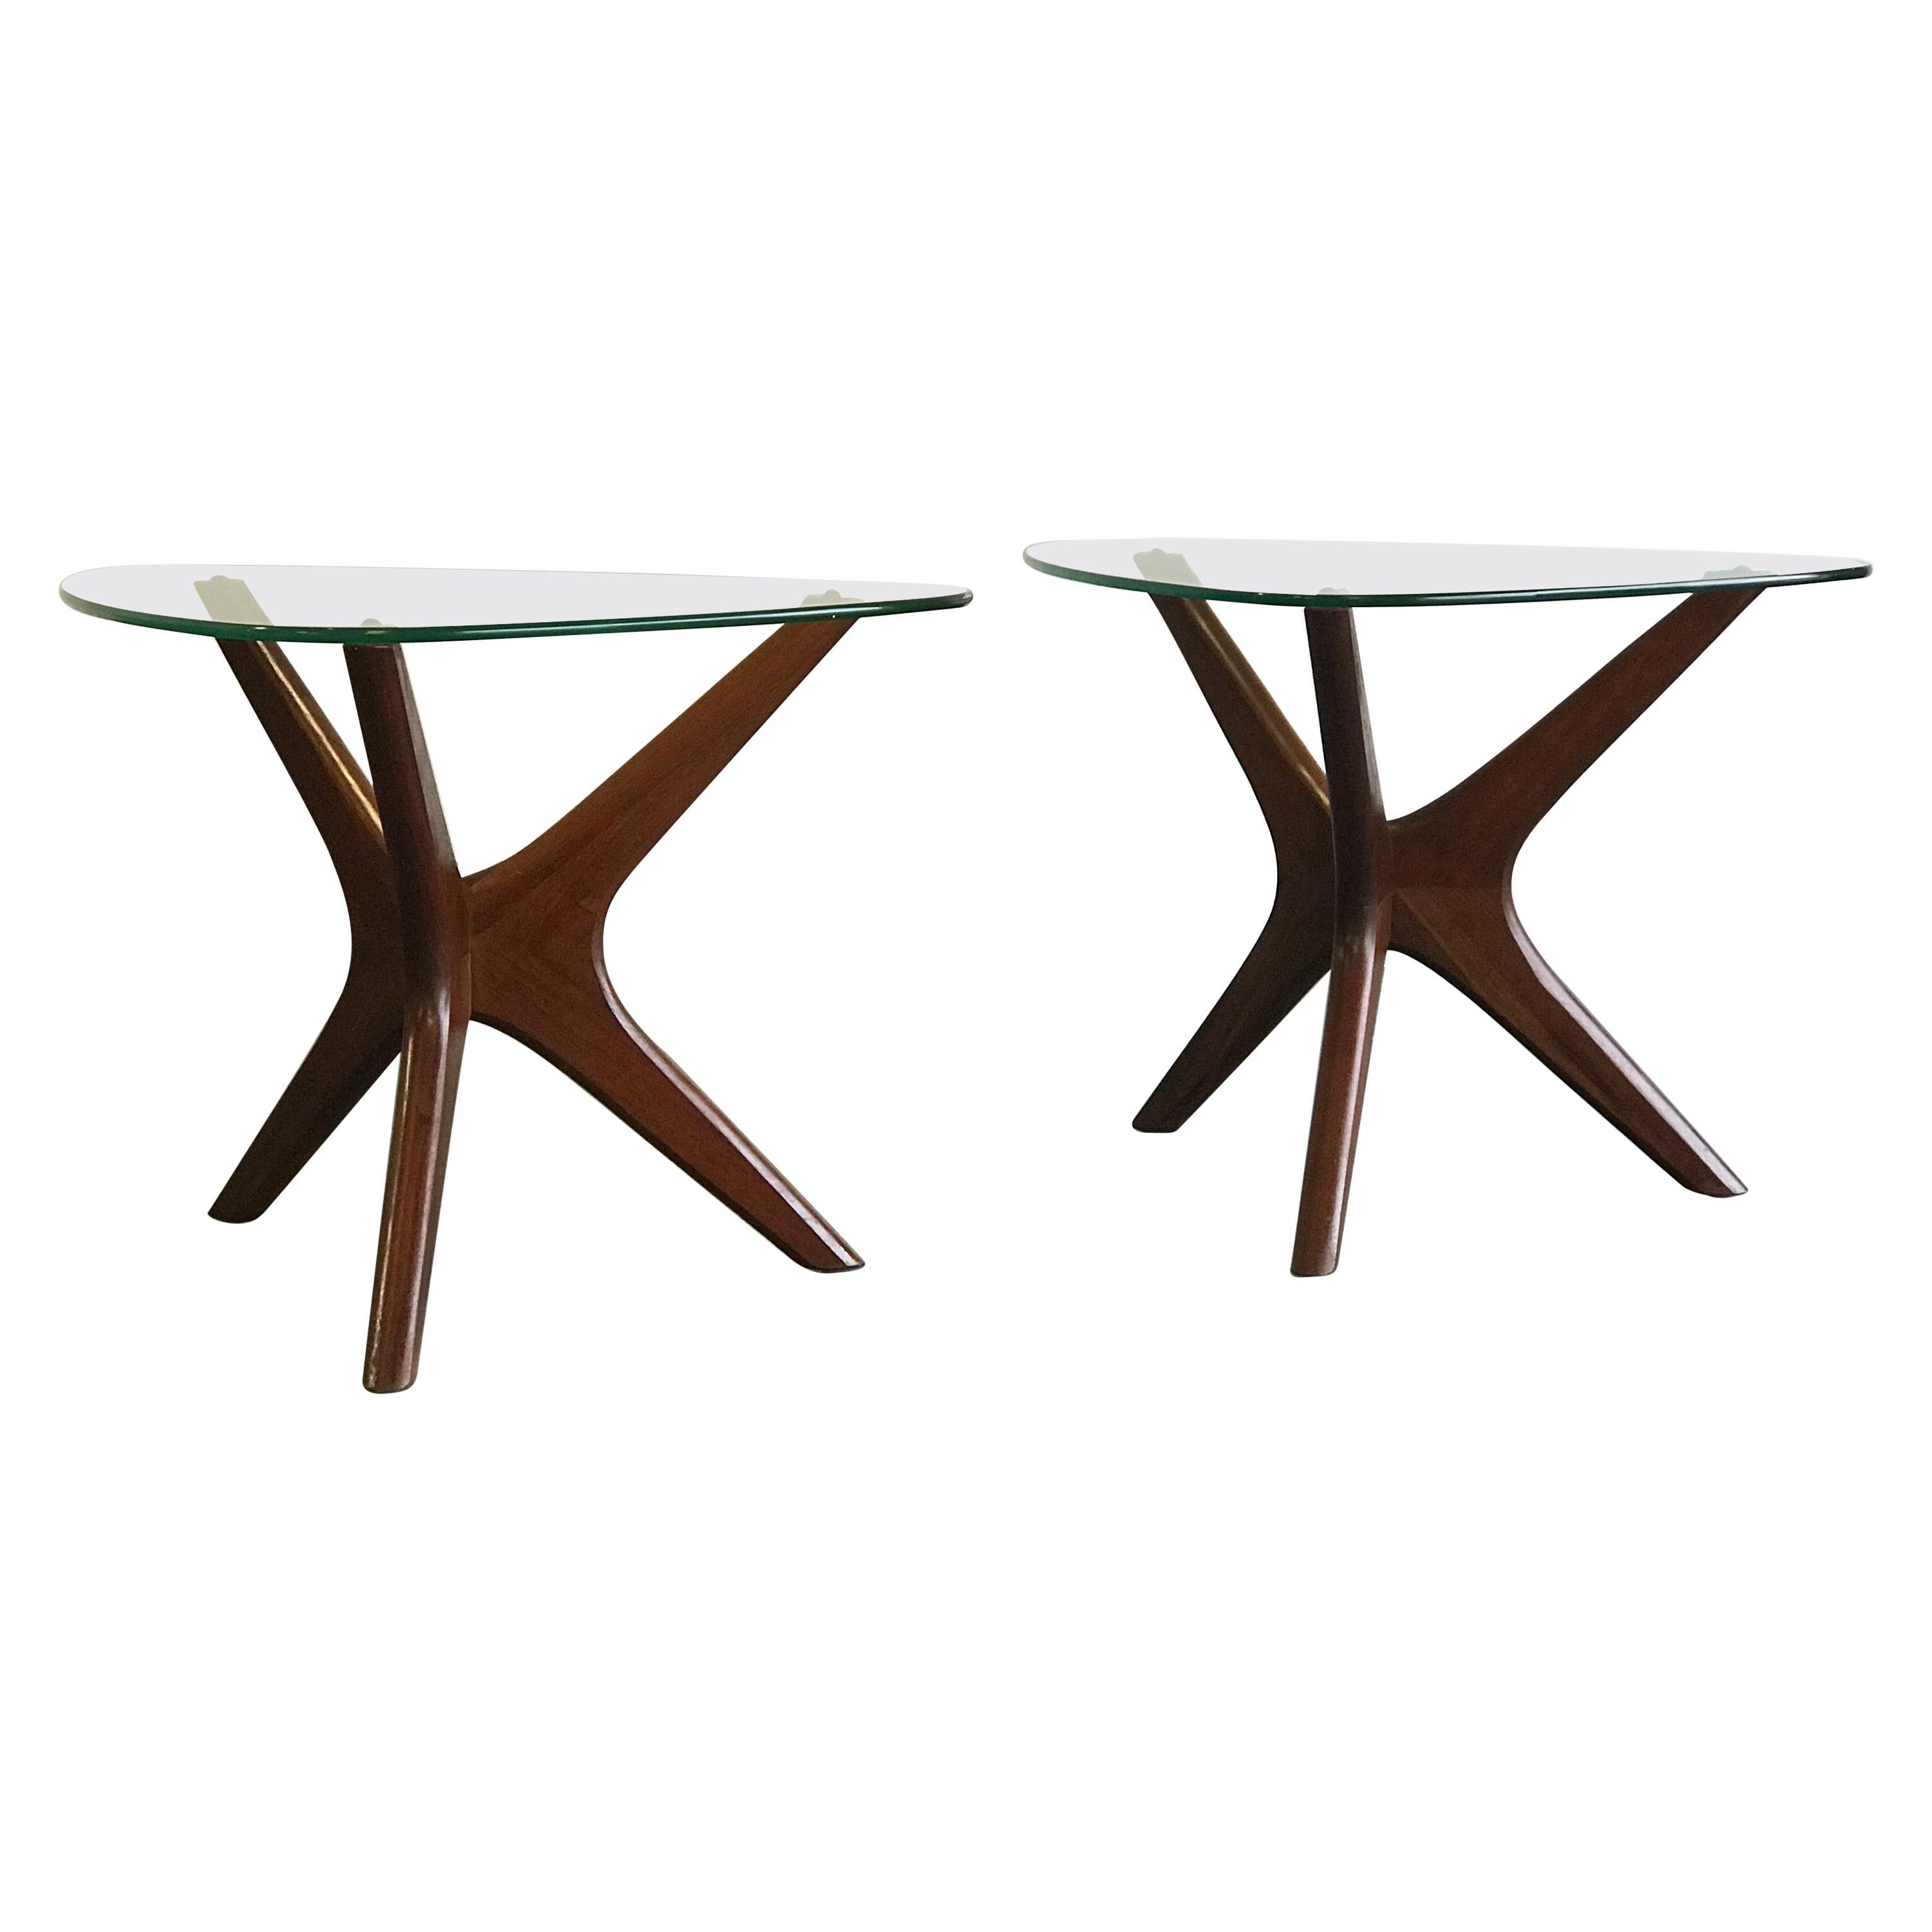 Adrian Pearsall “Jacks” End Tables, Walnut and Glass